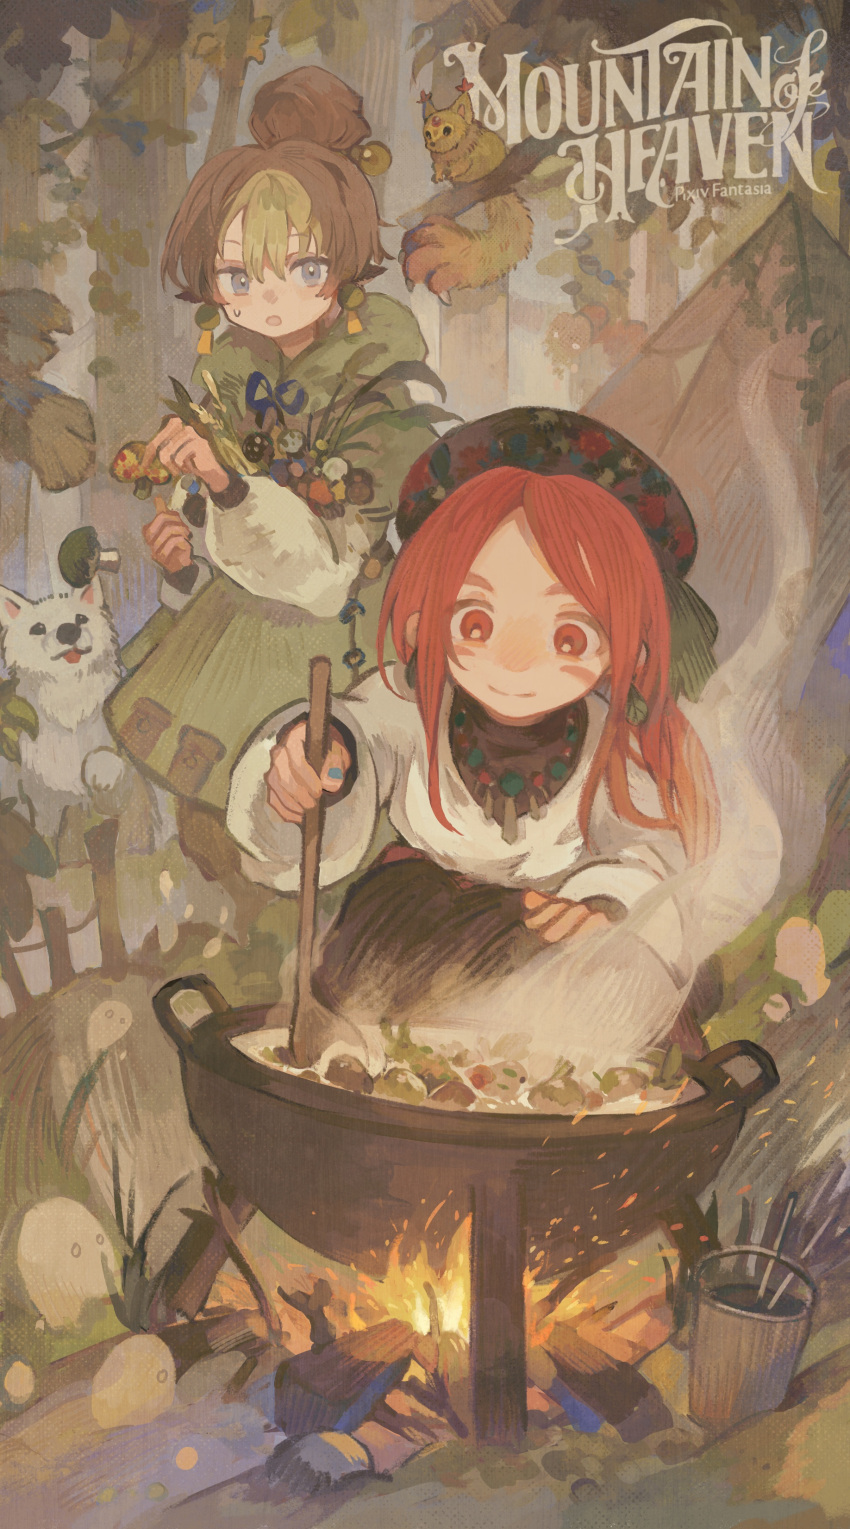 1boy 1girl absurdres agneta_(mountain_of_heaven) animal animal_ears blonde_hair blue_eyes brown_hair bucket copyright_name dog fire forest hair_bun highres jewelry juneliu927 long_hair luo_(mountain_of_heaven) multicolored_hair mushroom nature necklace outdoors pixiv_fantasia pixiv_fantasia_mountain_of_heaven pot red_eyes redhead short_hair spoon steam stew sweat tent two-tone_hair